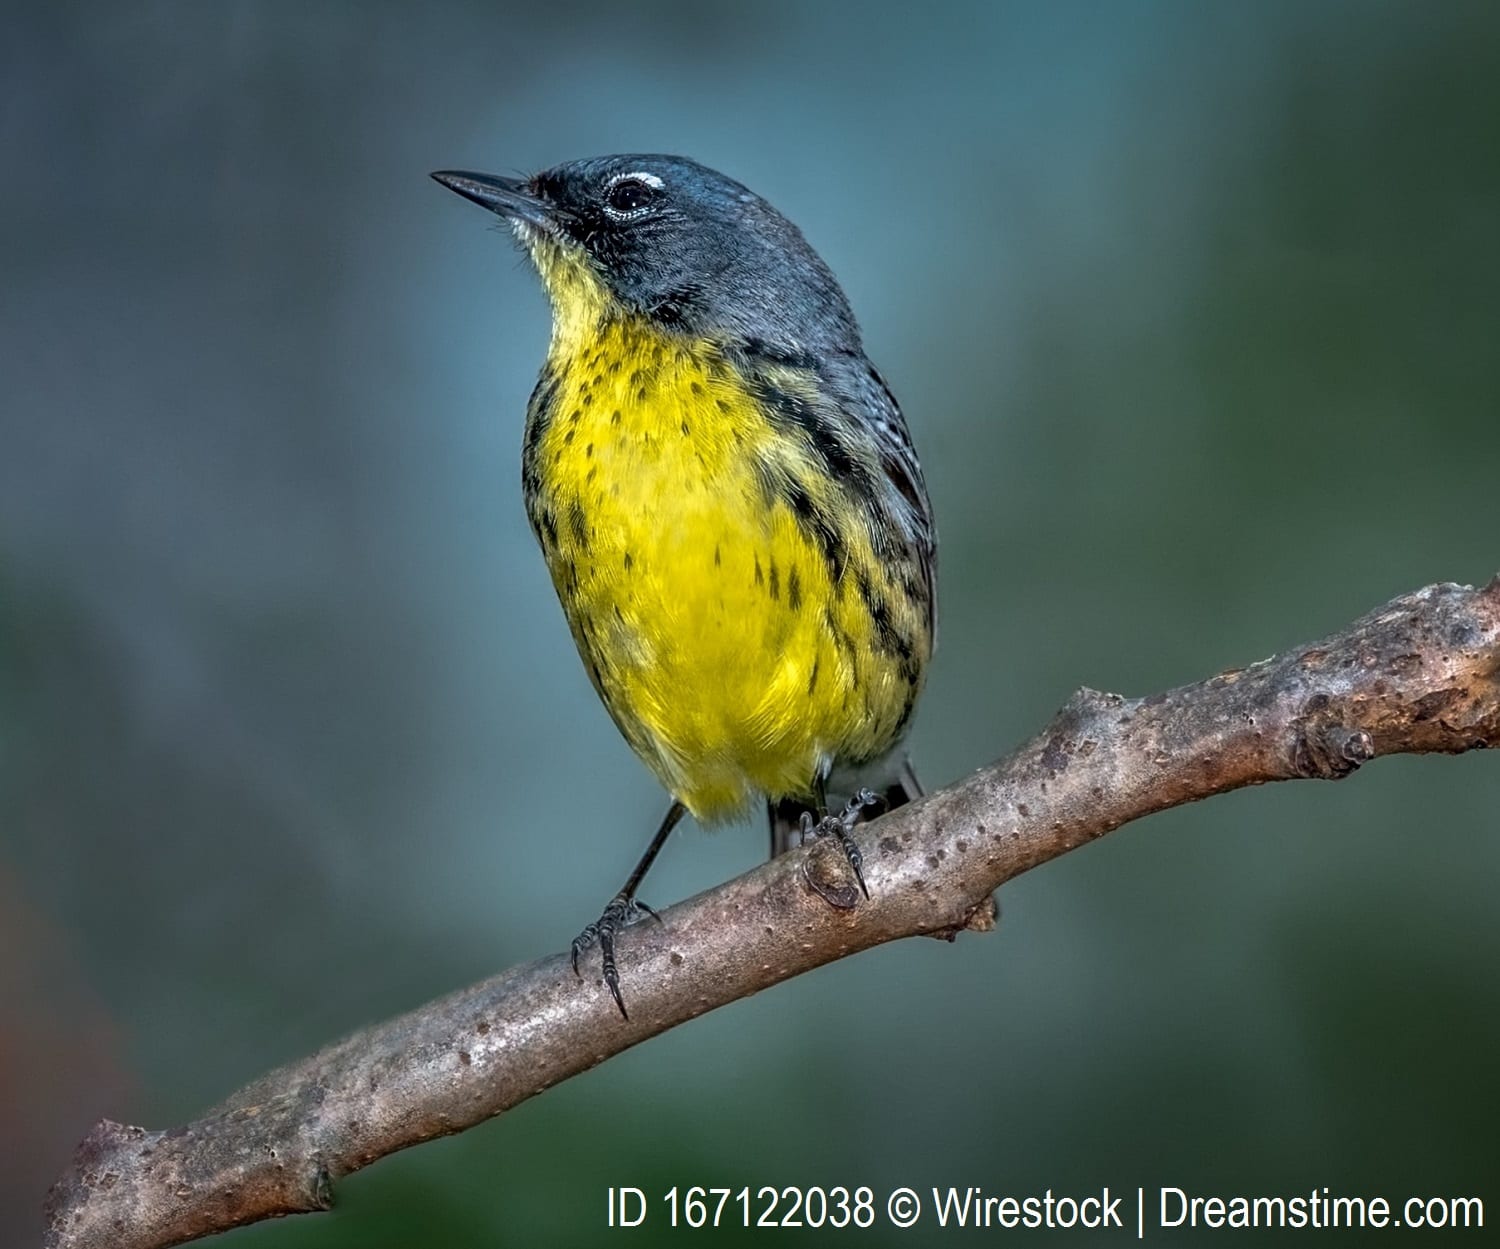 Kirtland's Warbler, one of the possible endangered species for students to examine.